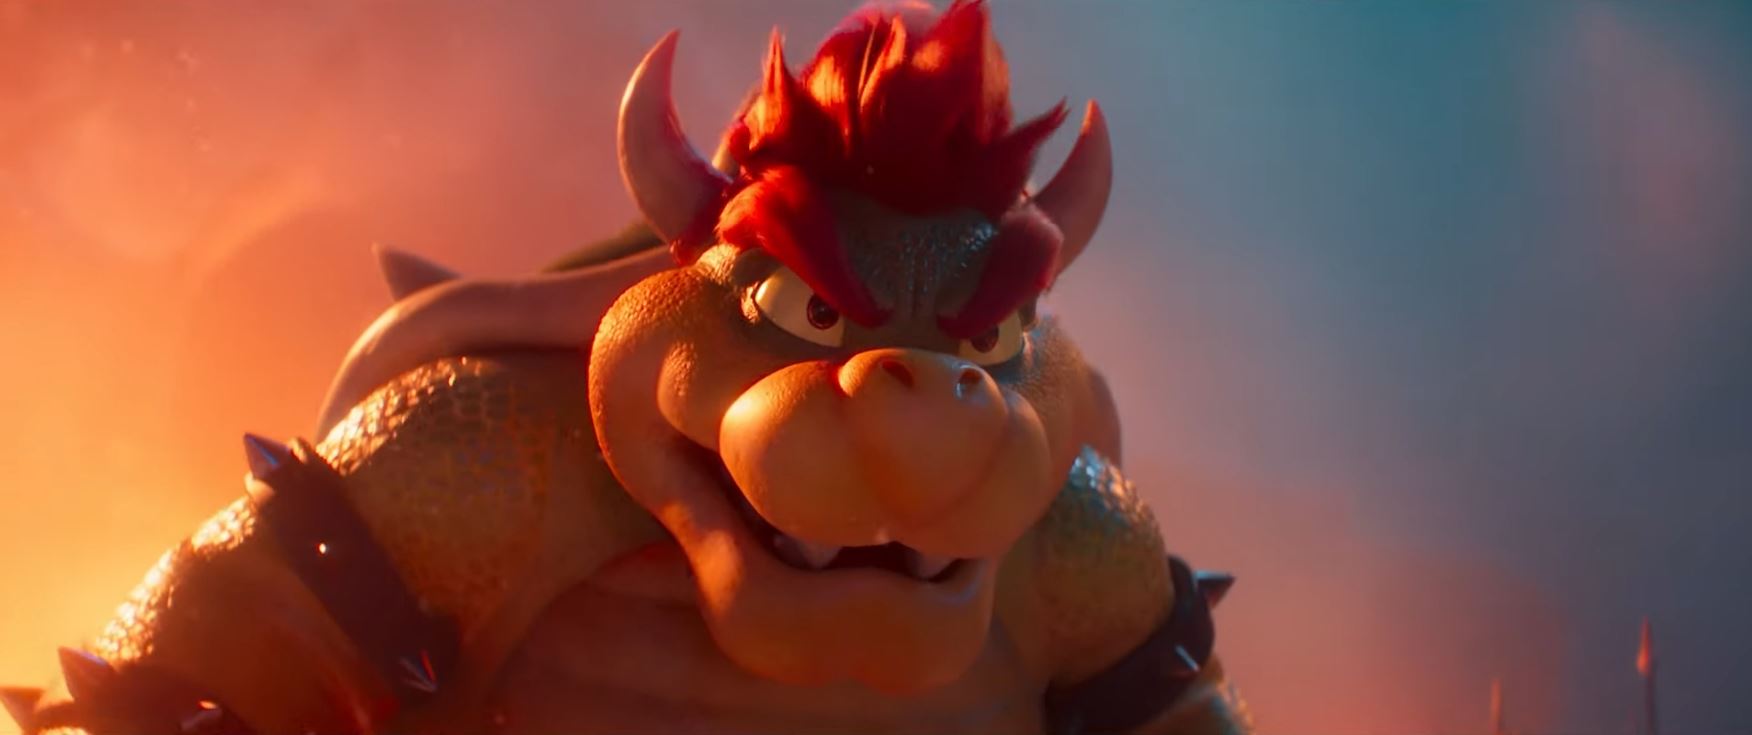 Bowser attacks in The Super Mario Bros. Movie’s first trailer